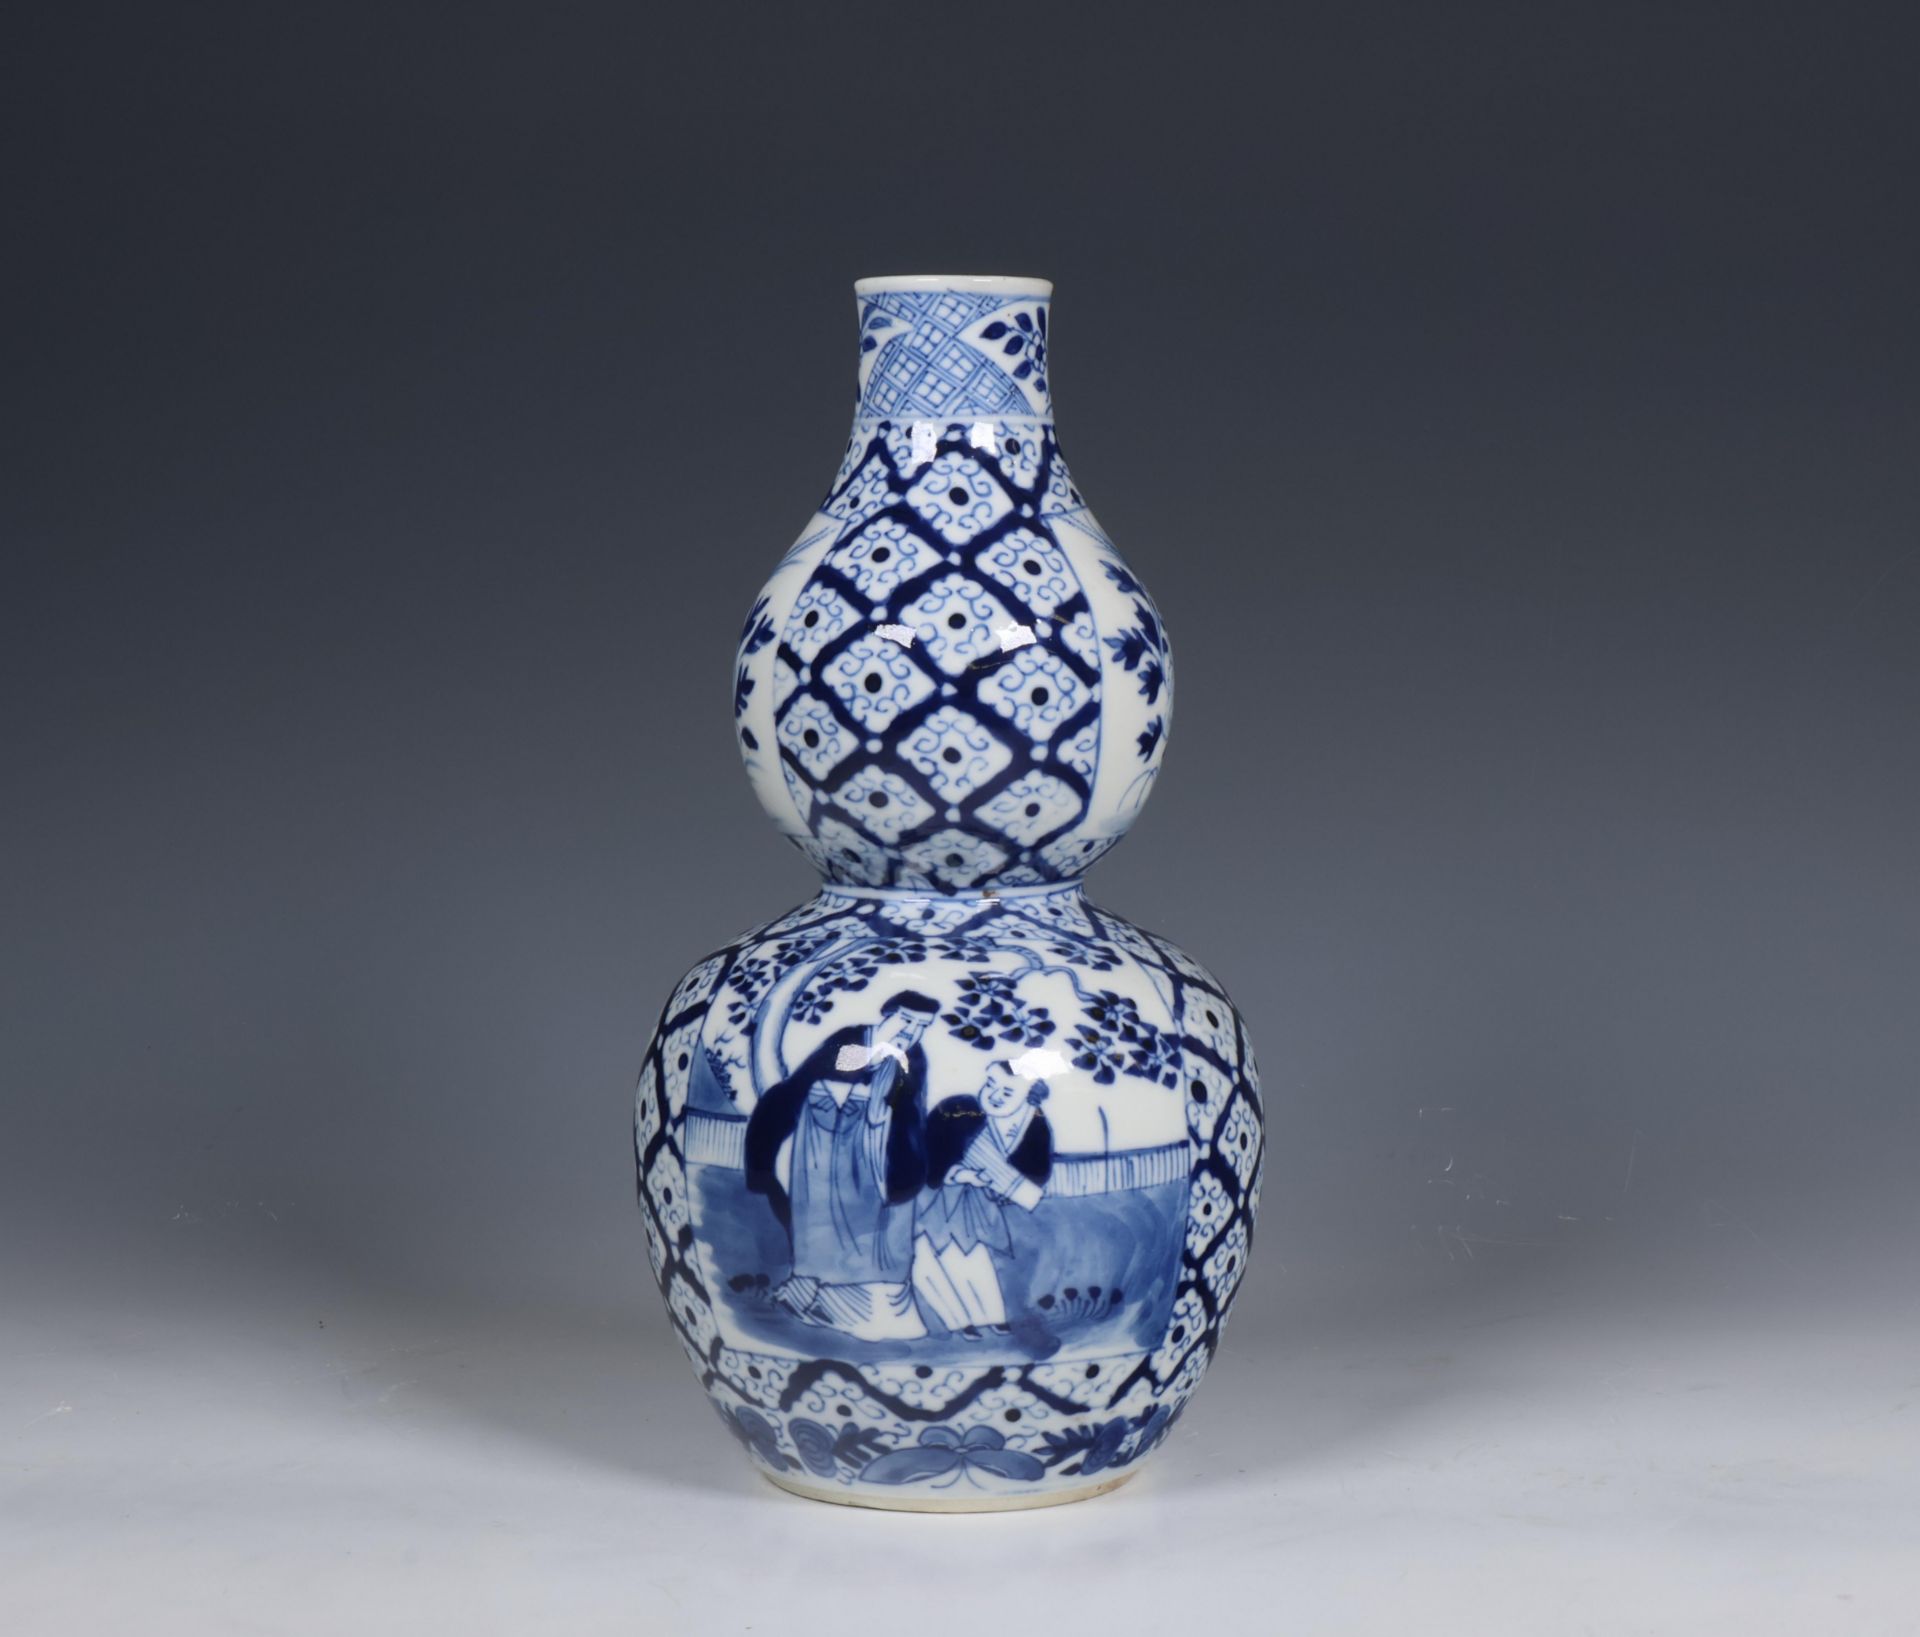 China, blue and white porcelain double-gourd vase, 19th century,